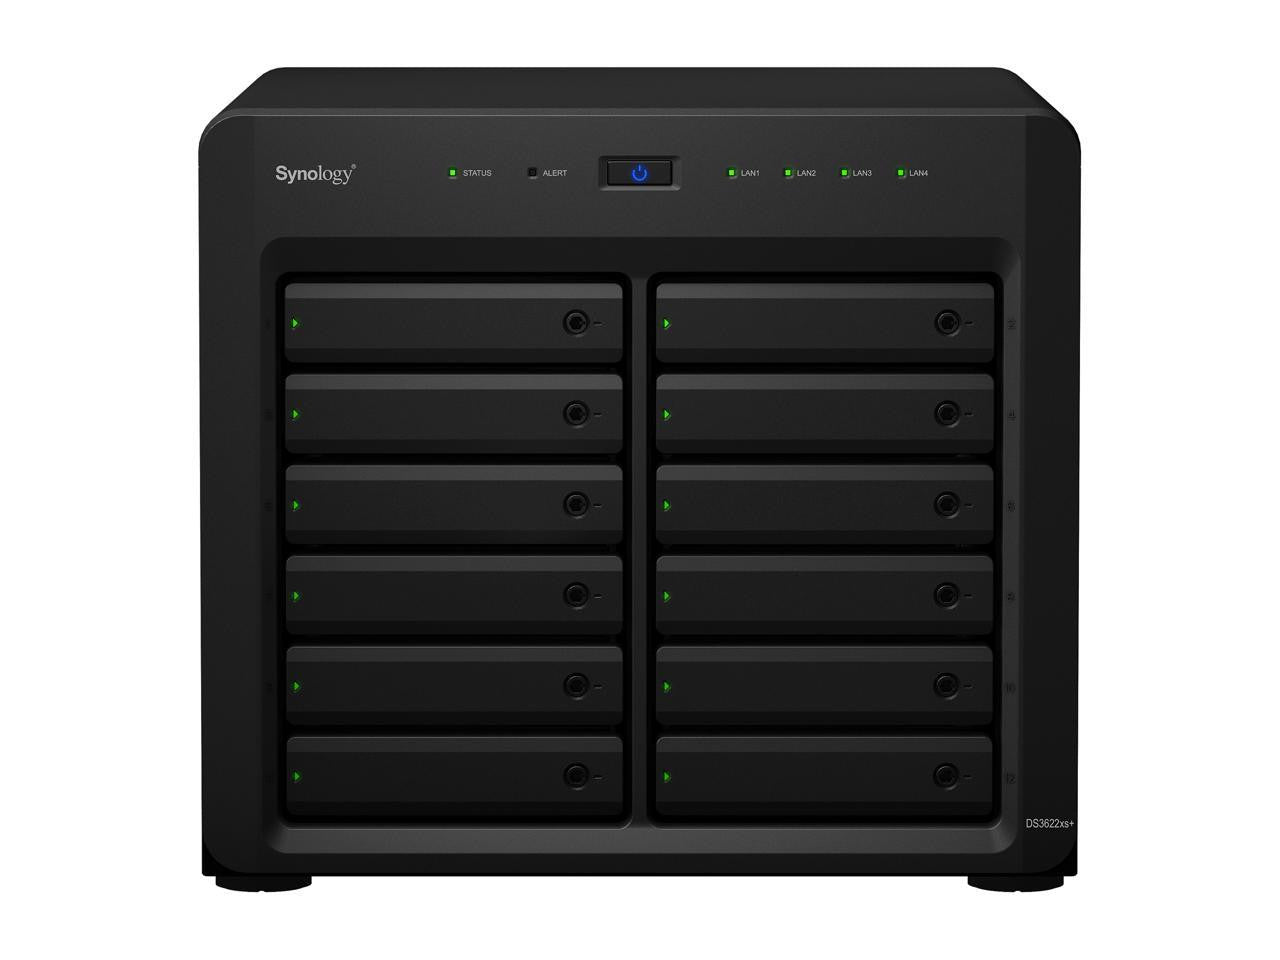 DS3622xs+ 12-BAY DiskStation with 48GB RAM and 192TB (12 x 16TB) of HAT5300 Synology Enterprise Drives